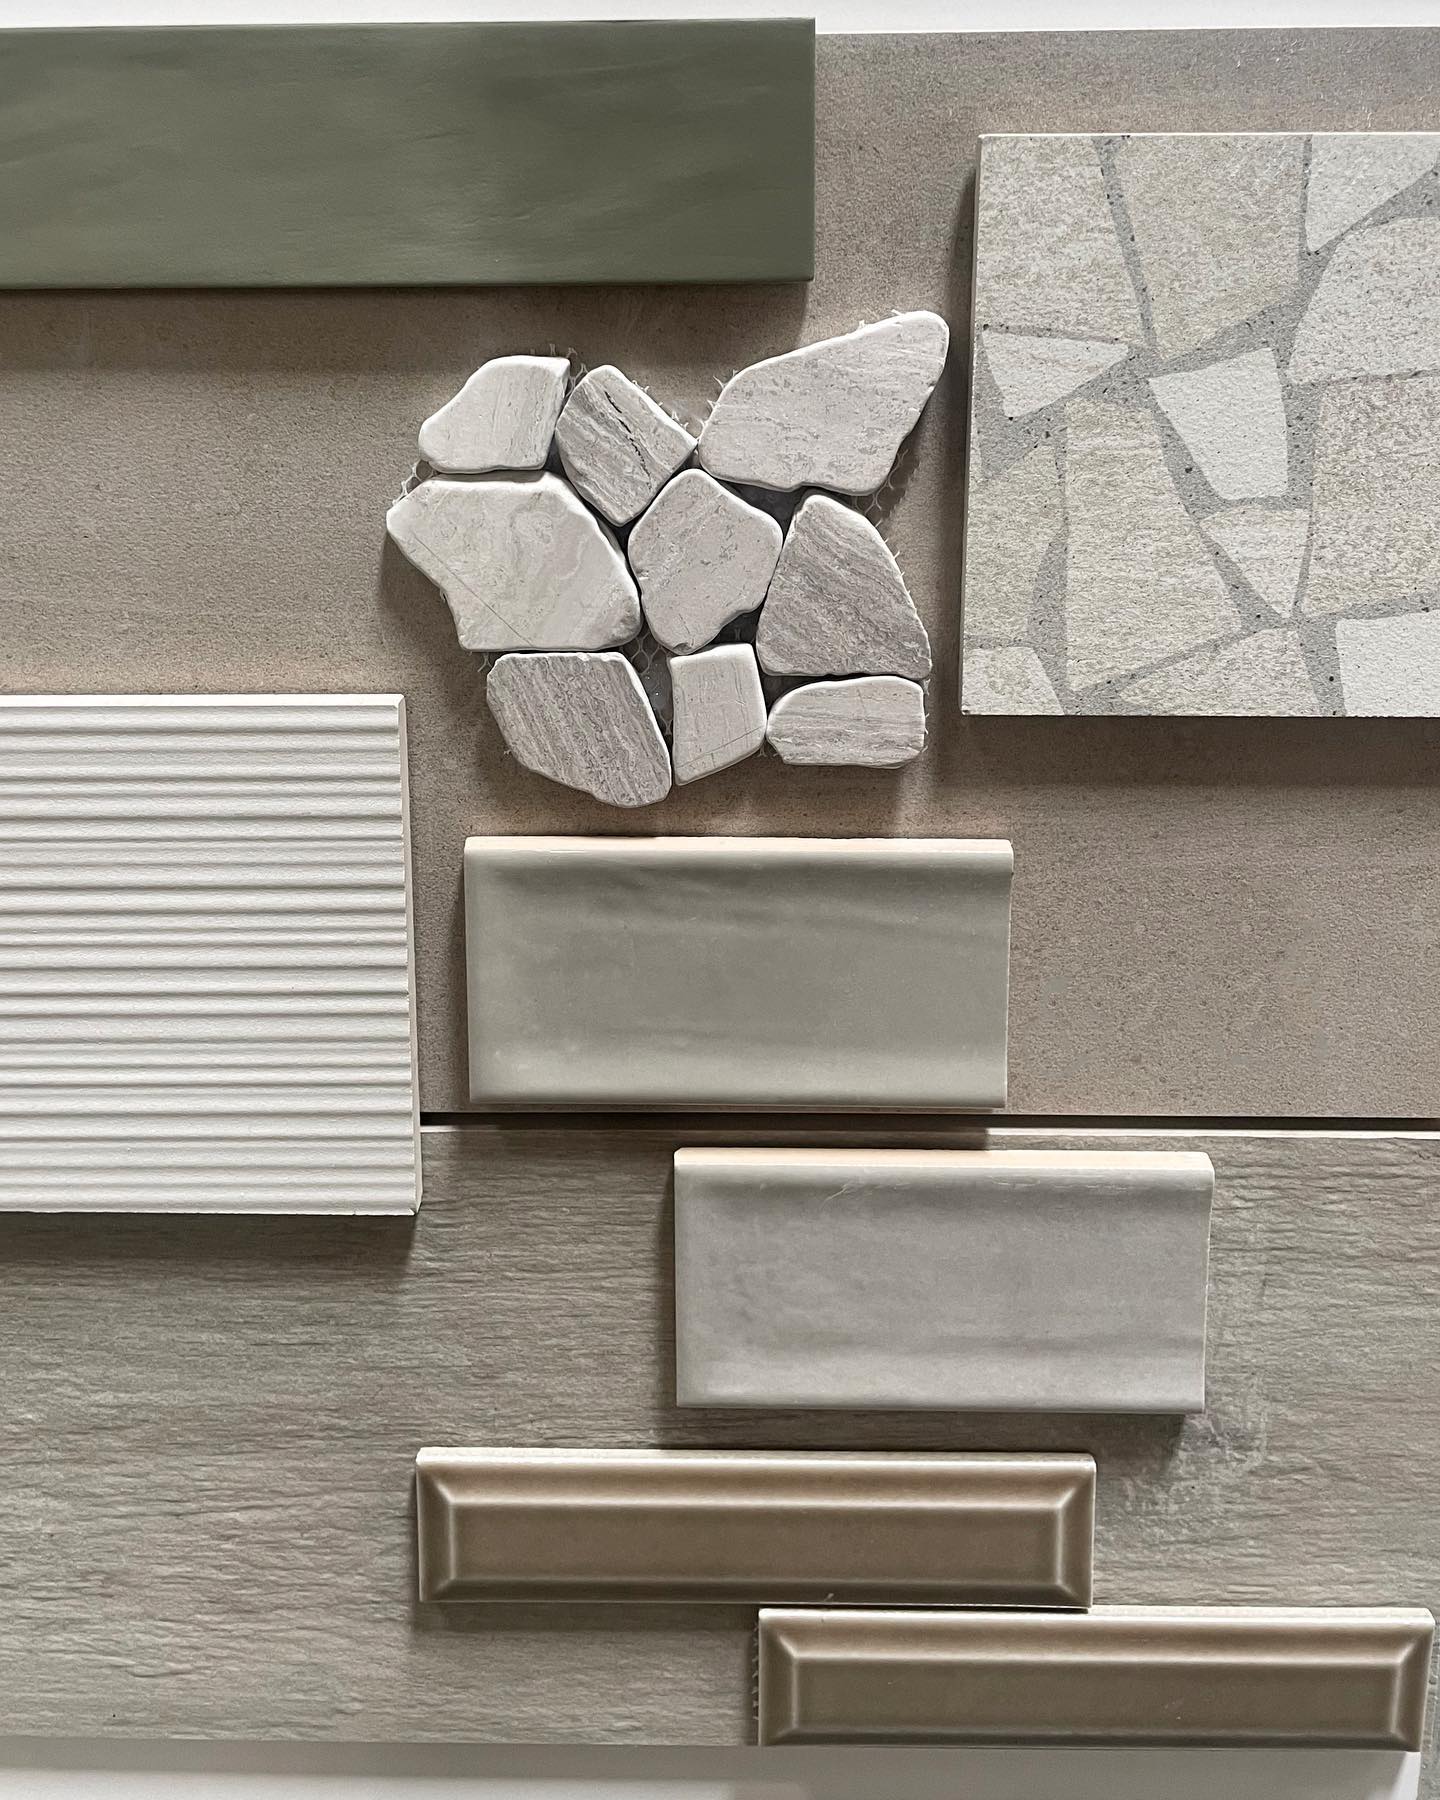 Warm neutrals we love 😍
Featured collections: Hues, Sparkle, Mood, Raku, Cultura, & Kinetic

#tiletuesday #emsertile